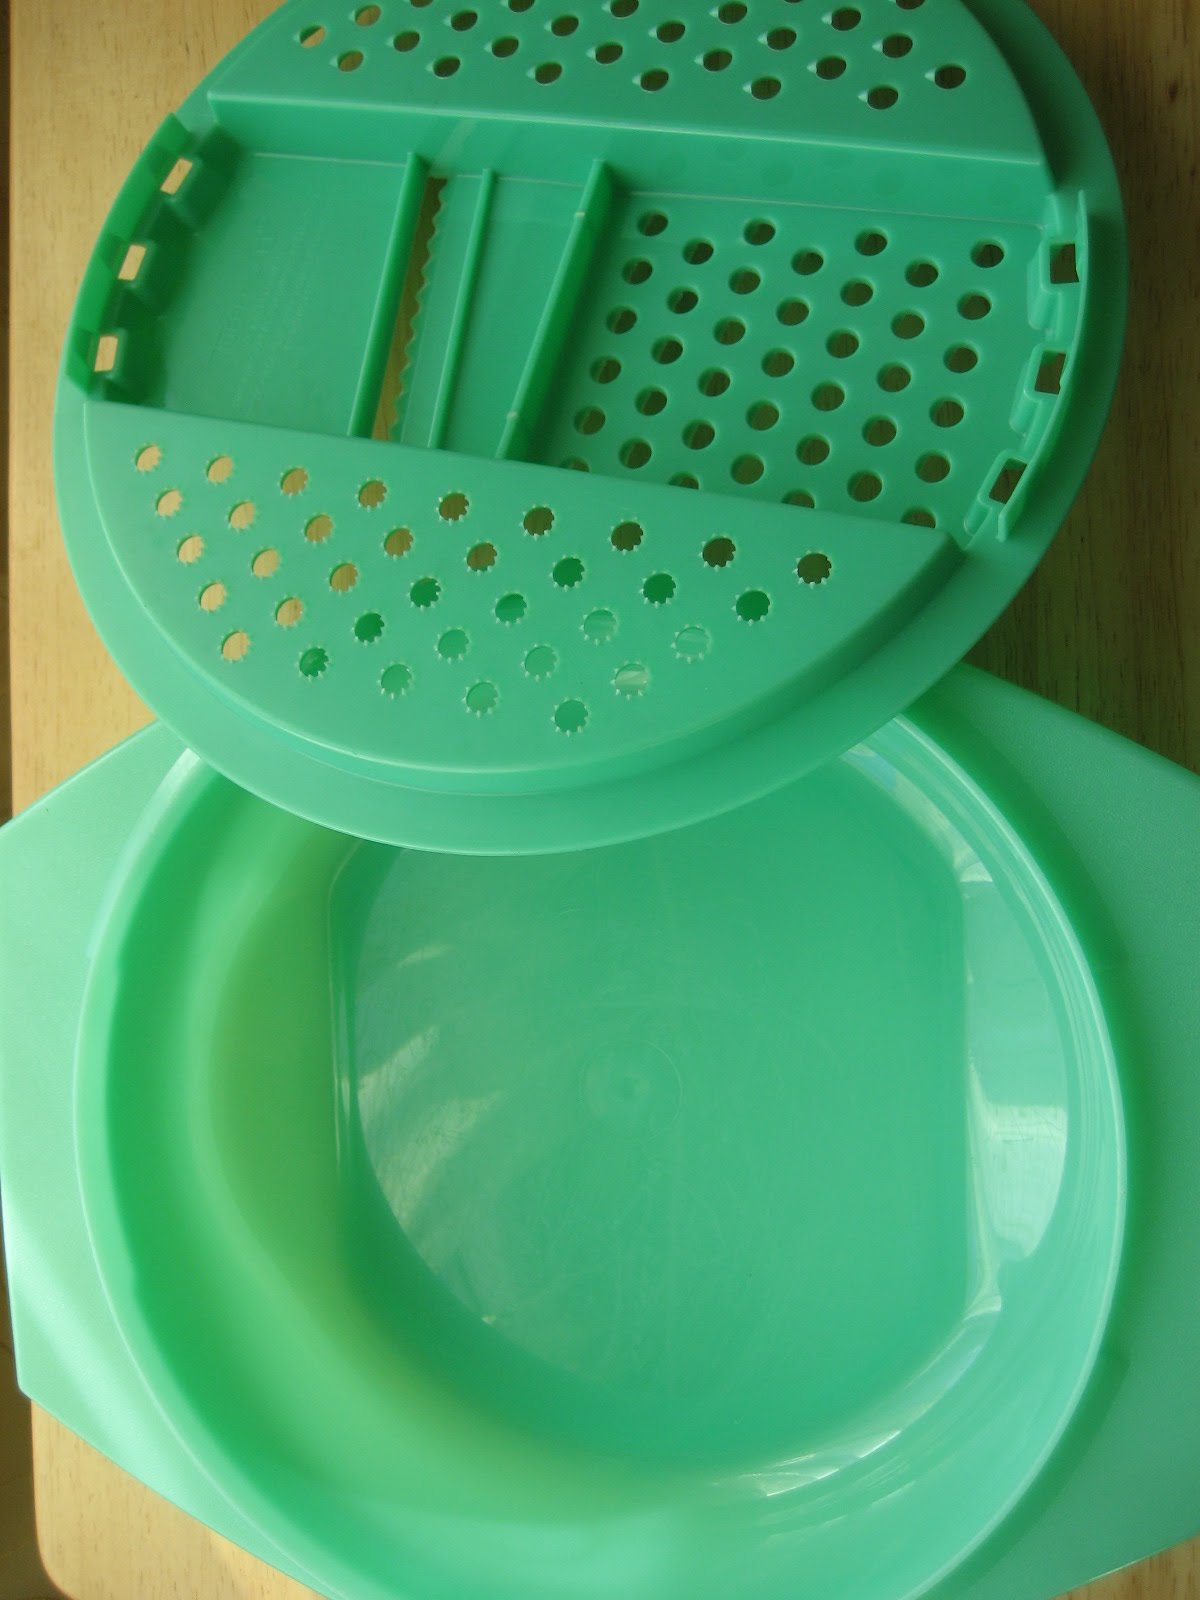 Tupperware Cheese Grater Green 